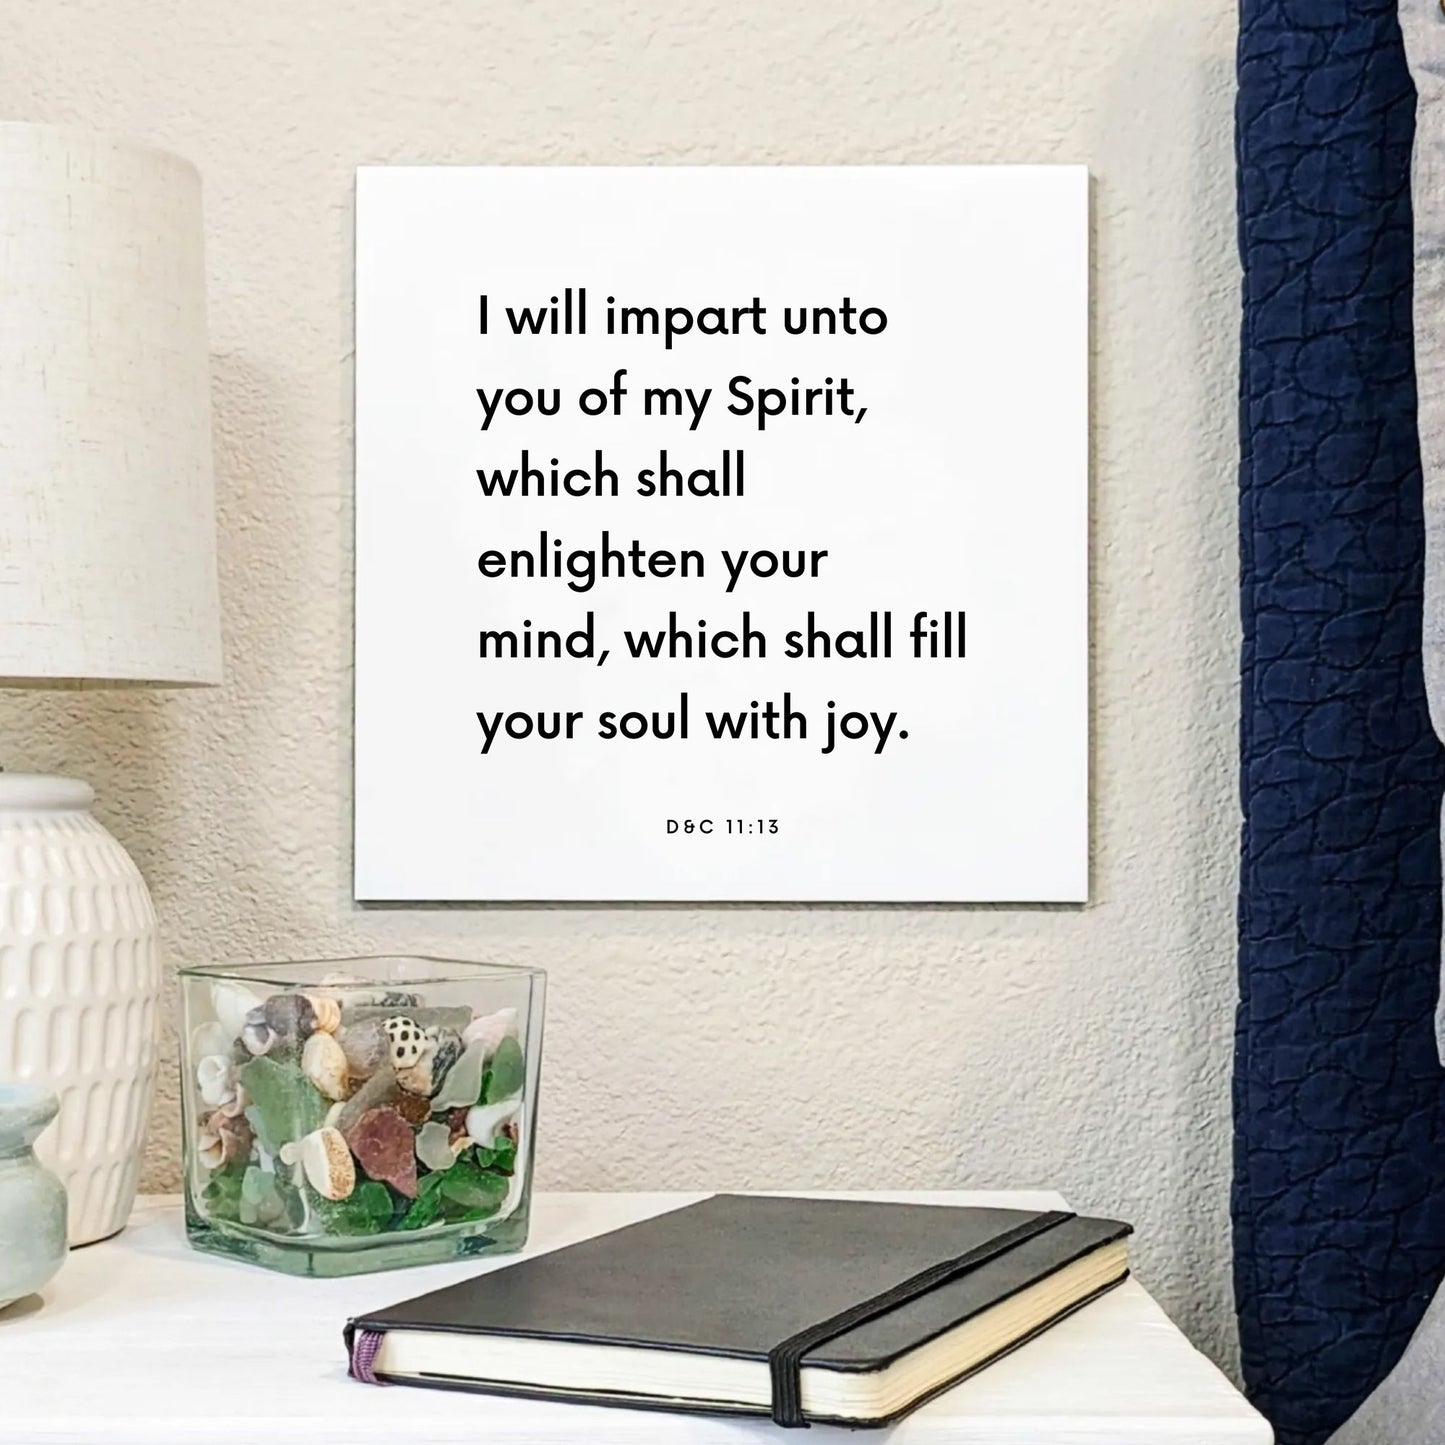 Bedside mouting of the scripture tile for D&C 11:13 - "I will impart unto you of my Spirit"